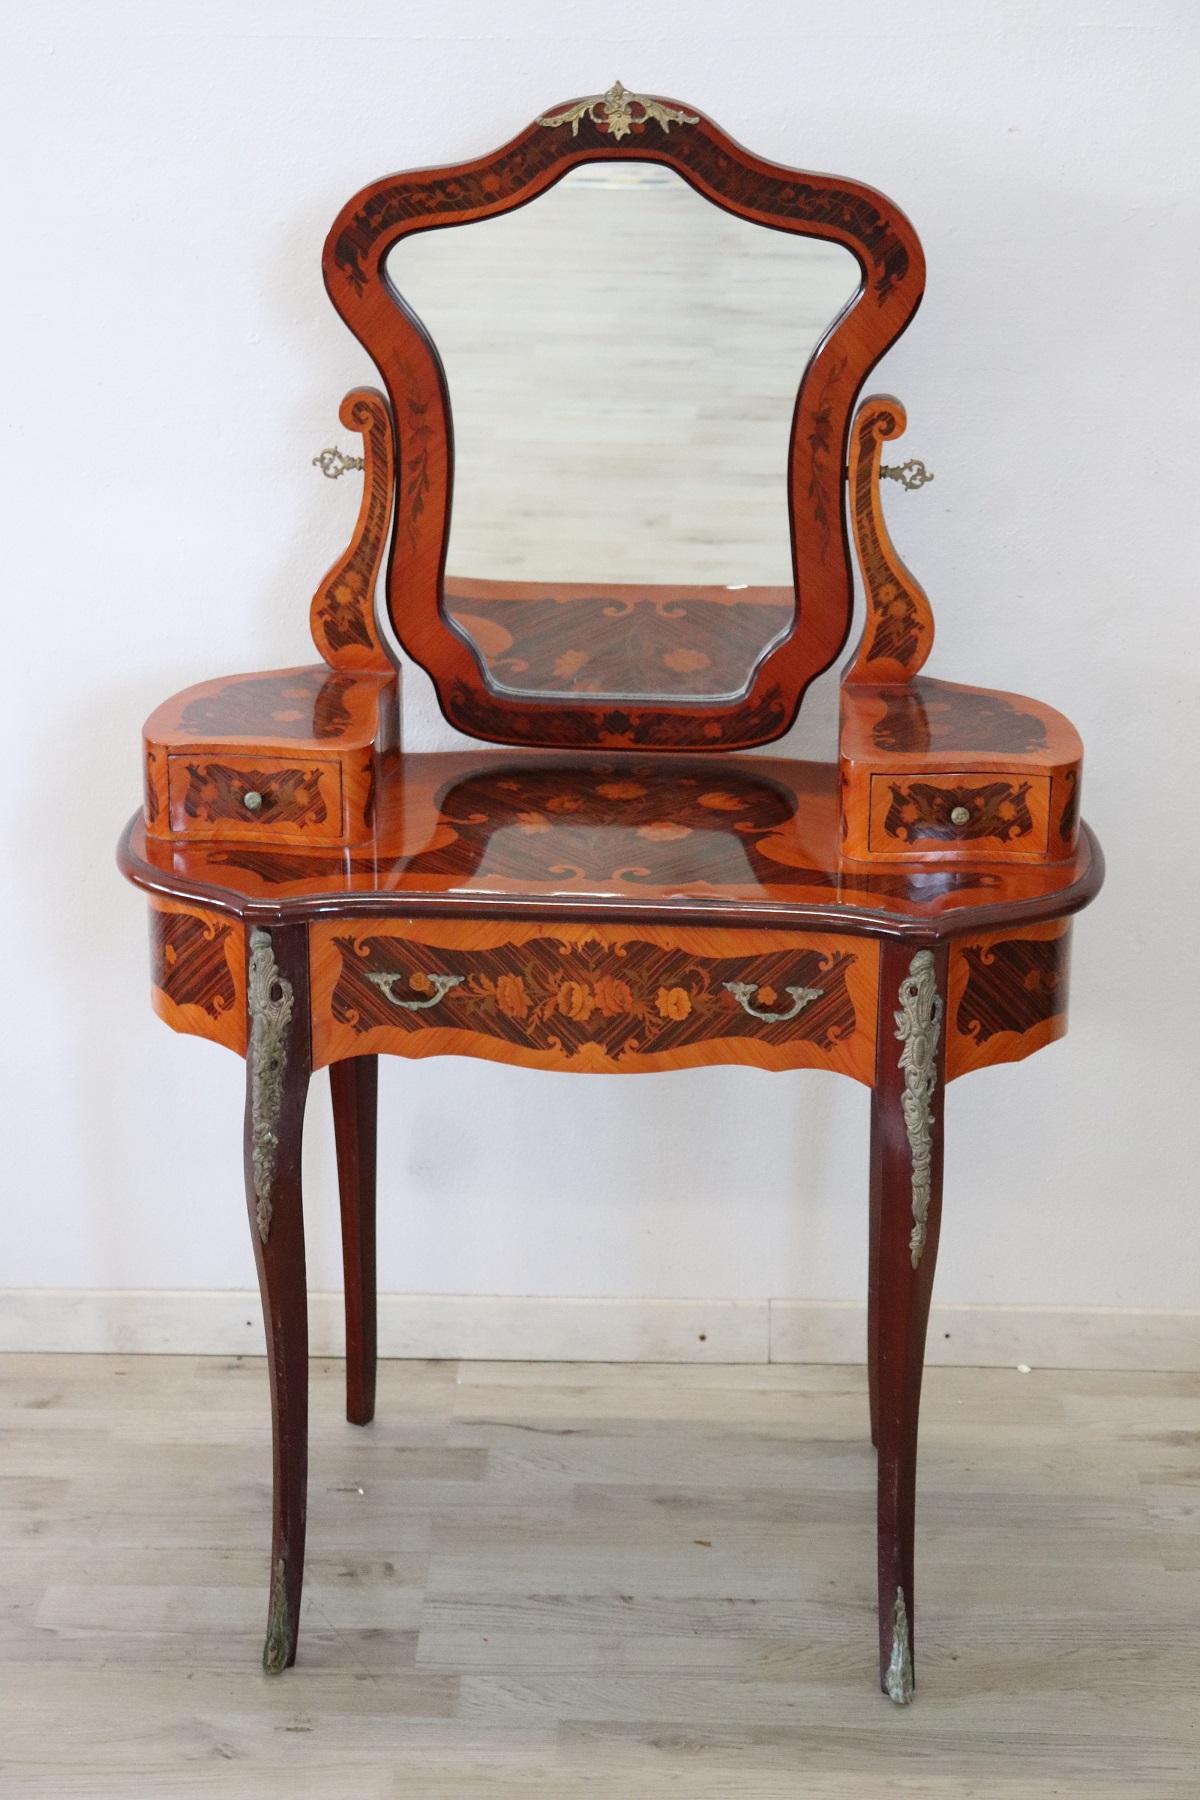 Rare and fine quality Italian Louis XV style 1950s dressing table with stool in inlay wood. The table has a particular legs slender. Fine floral inlay decoration in precious rosewood. The plan and the sides presents an elaborate inlay wood with